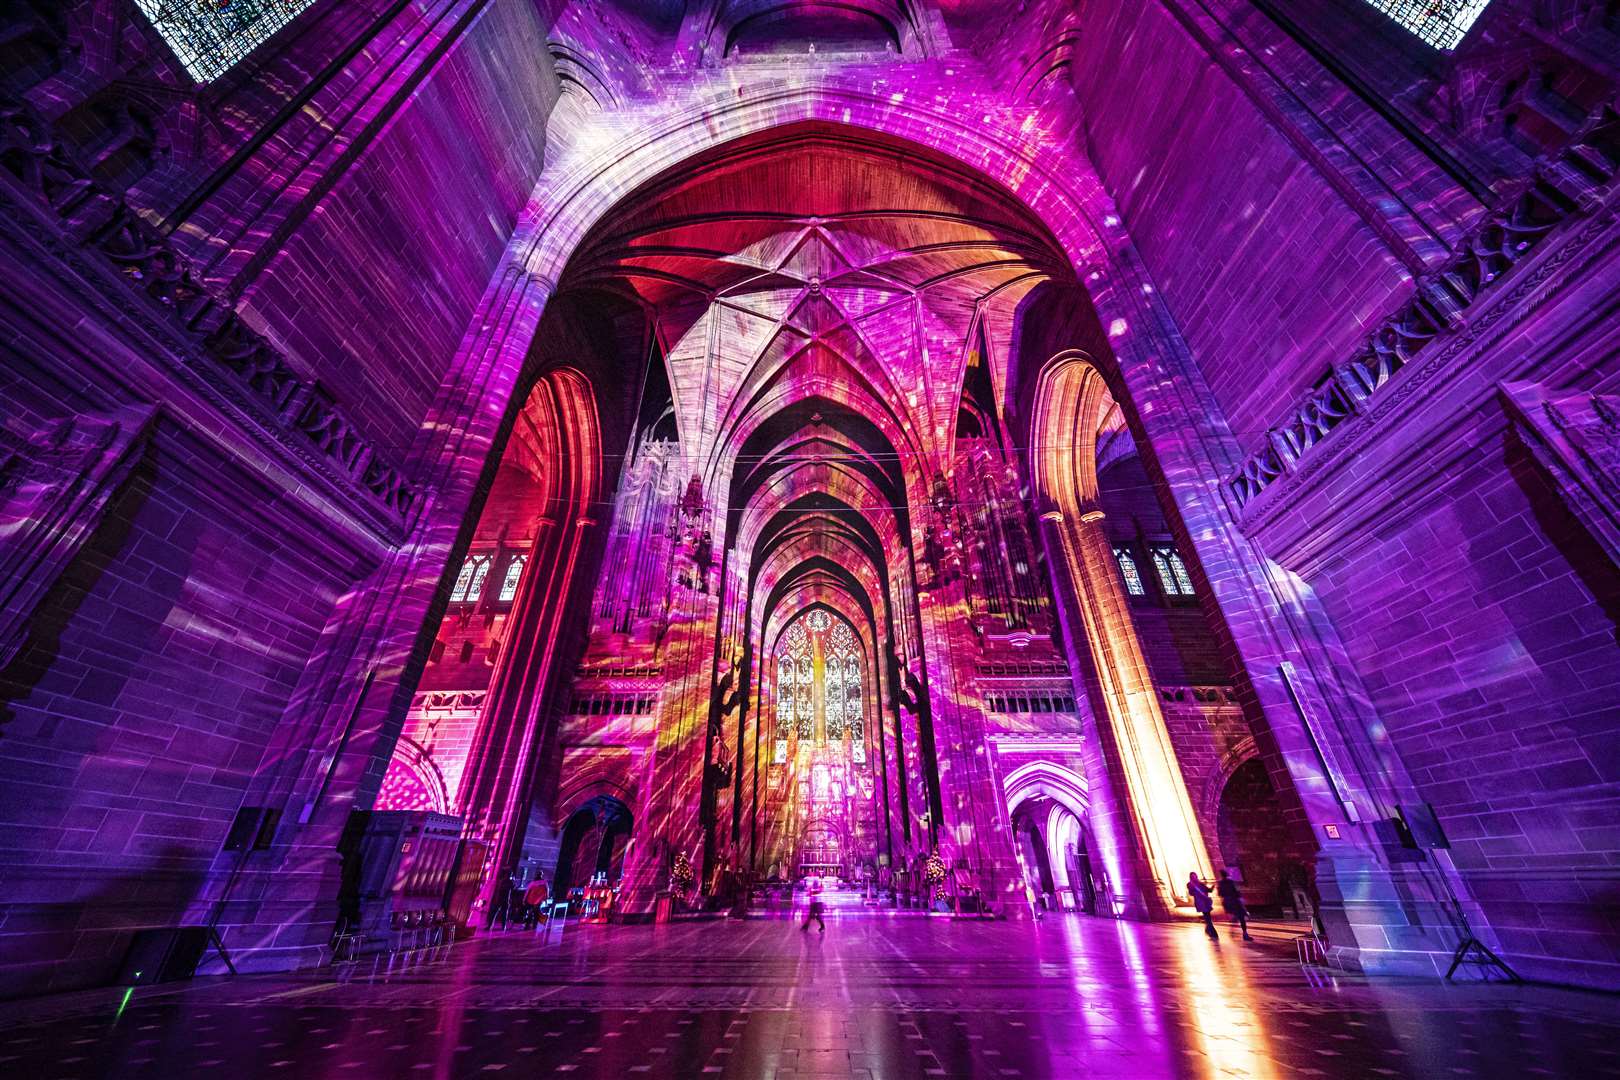 Luxmuralis are bringing yet another stunning light show to Kent. Picture: Luxmuralis